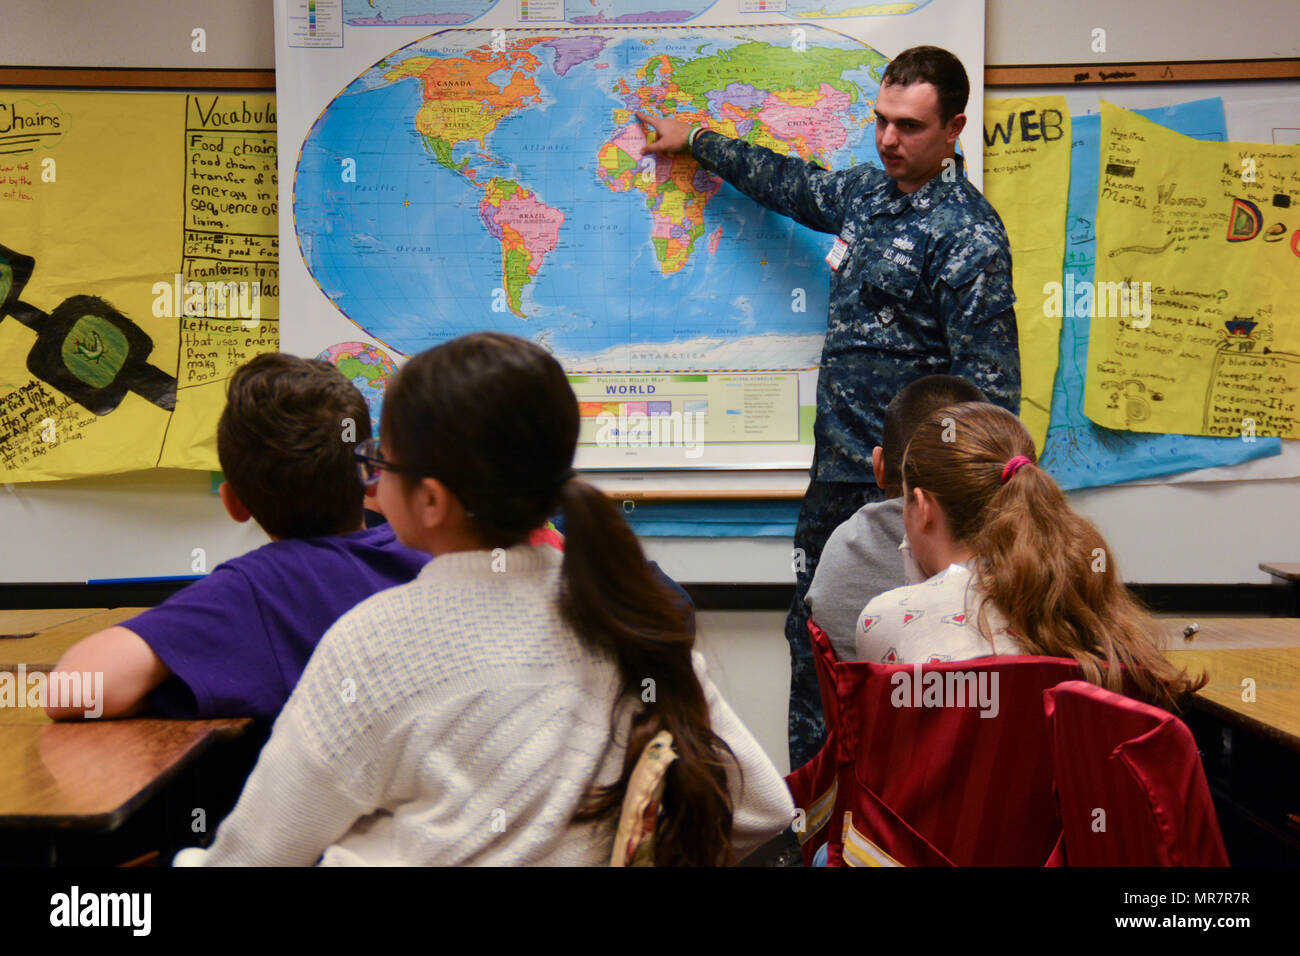 170519-N-IG780-048 IRVING, Texas (May 19, 2017) Machinist Mate 2nd Class Adam Al Sharif, a recruiter assigned to Navy Recruiting District (NRD) Dallas, shows everywhere he has traveled with the U.S. Navy to students at Thomas Haley Elementary School during Career Day. NRD Dallas encompasses 150,000 square miles that includes Northwest Texas and Oklahoma. (U.S. Navy photo by Mass Communication Specialist 2nd Class Shane A. Jackson/Released) Stock Photo